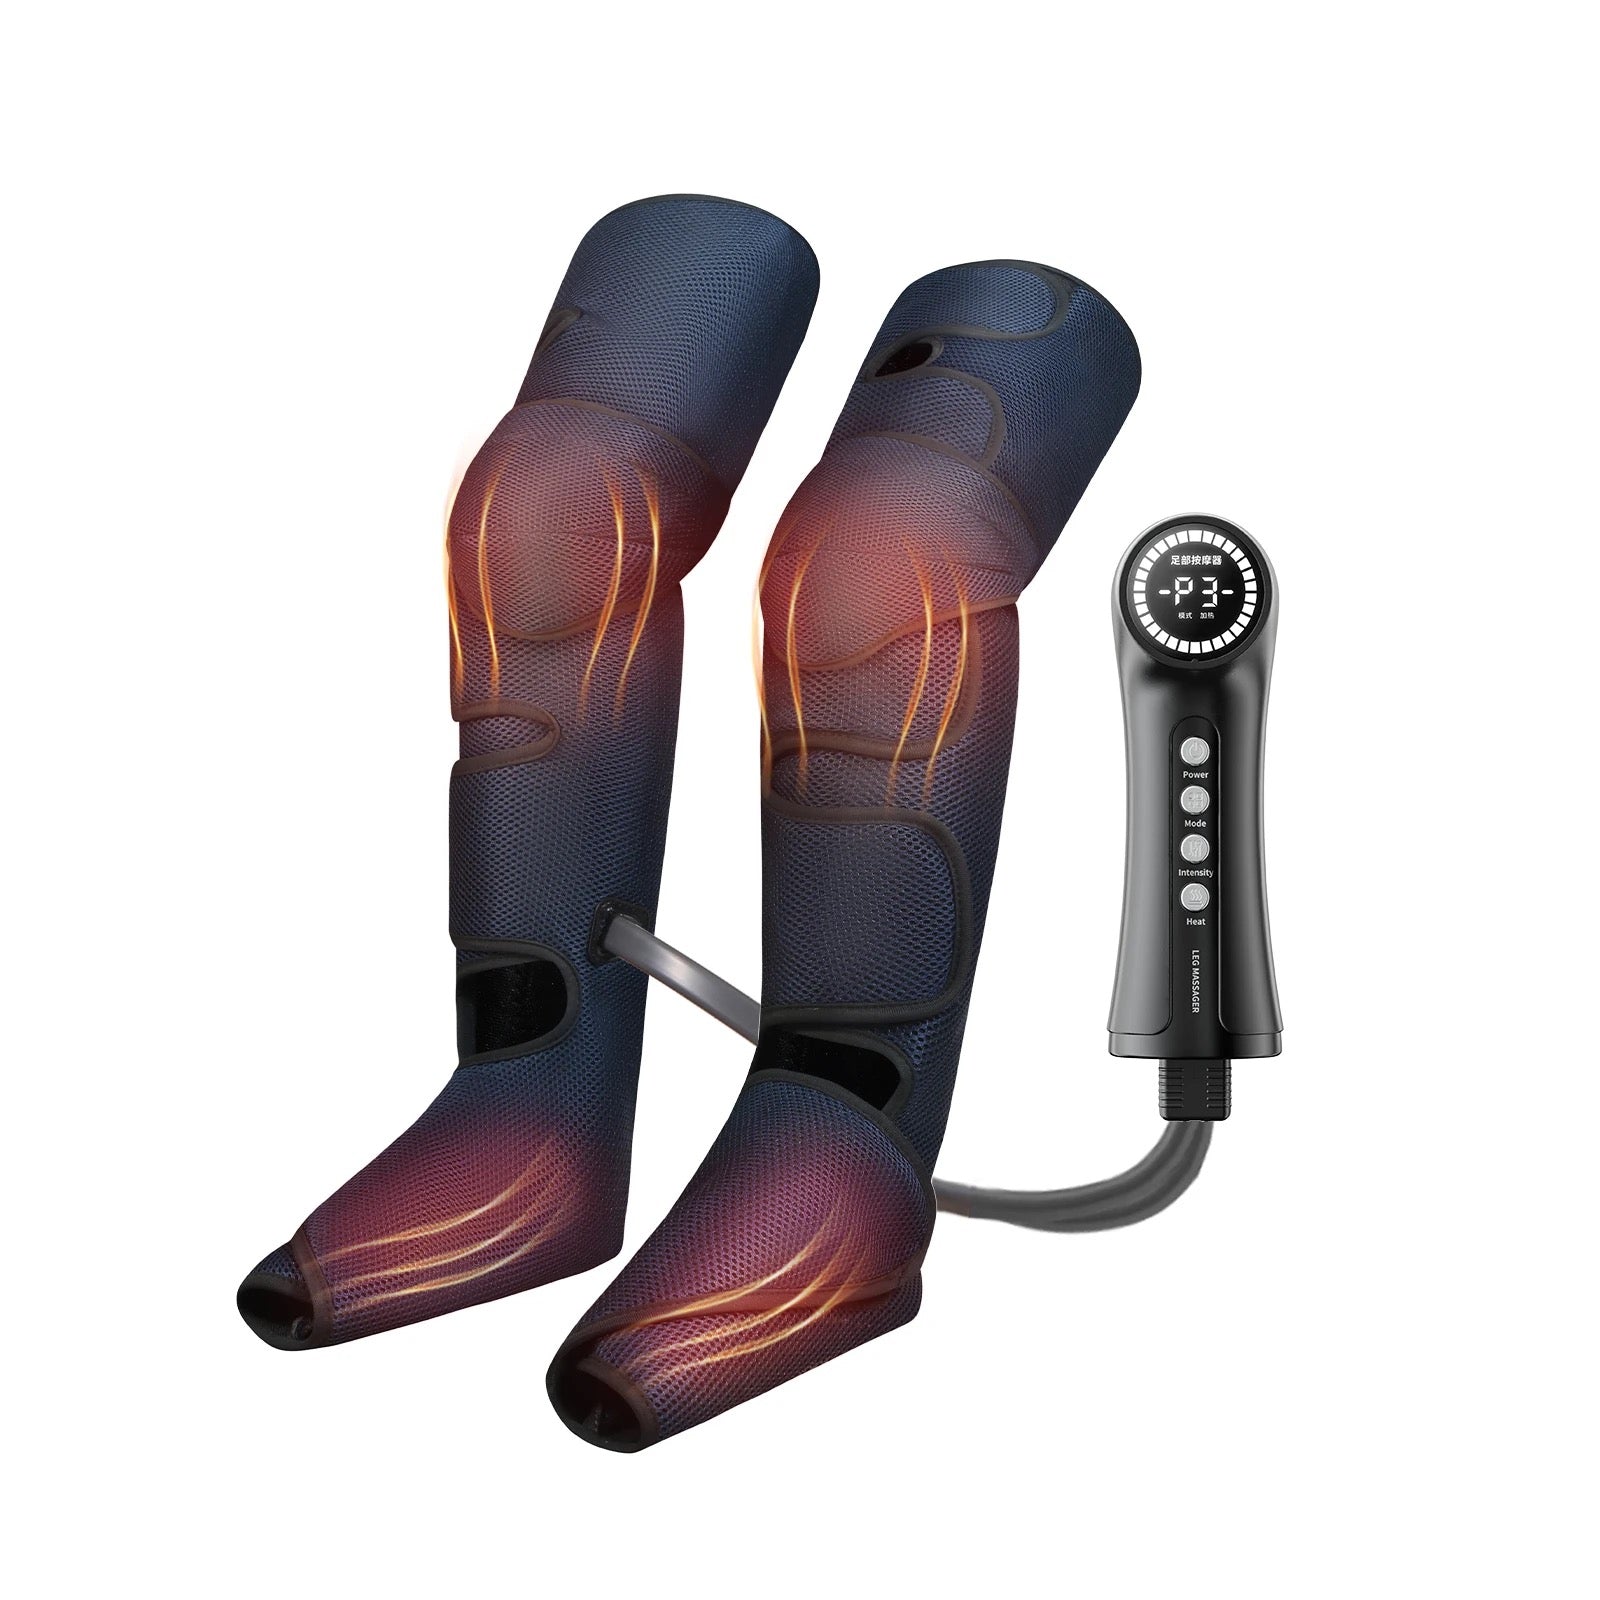 Compression therapy works by increasing blood flow and reducing swelling in the legs and feet, making it an effective treatment for a variety of conditions such as lymphedema, post operative swelling, venous insufficiency, and deep vein thrombosis. Includes hand held remote control with multiple compression level adjustments and varying heat temperature settings. 